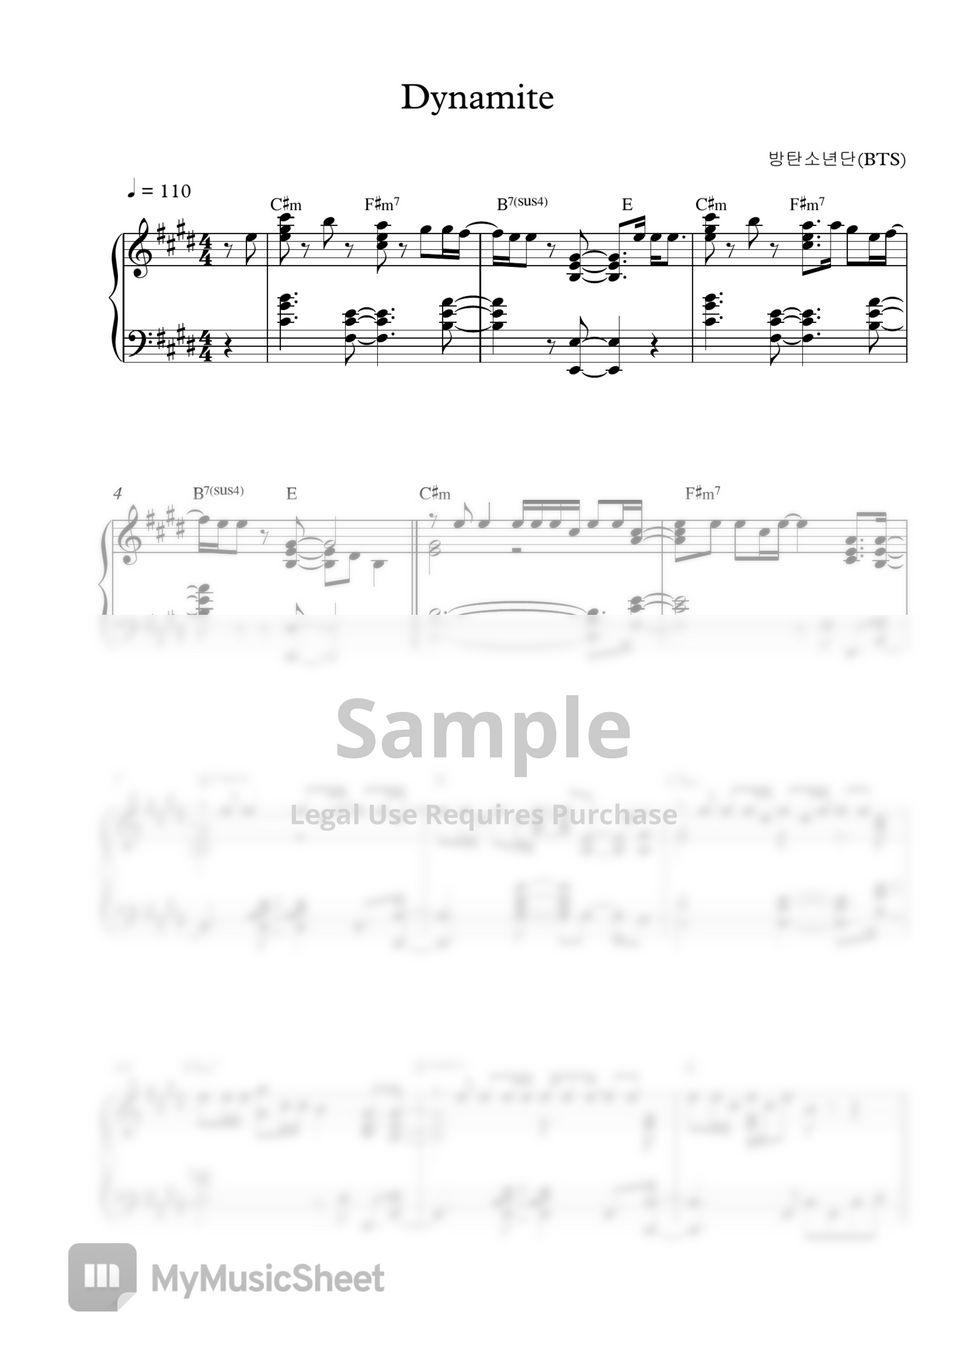 BTS - Dinamite (This sheet music) by Pineapplechord